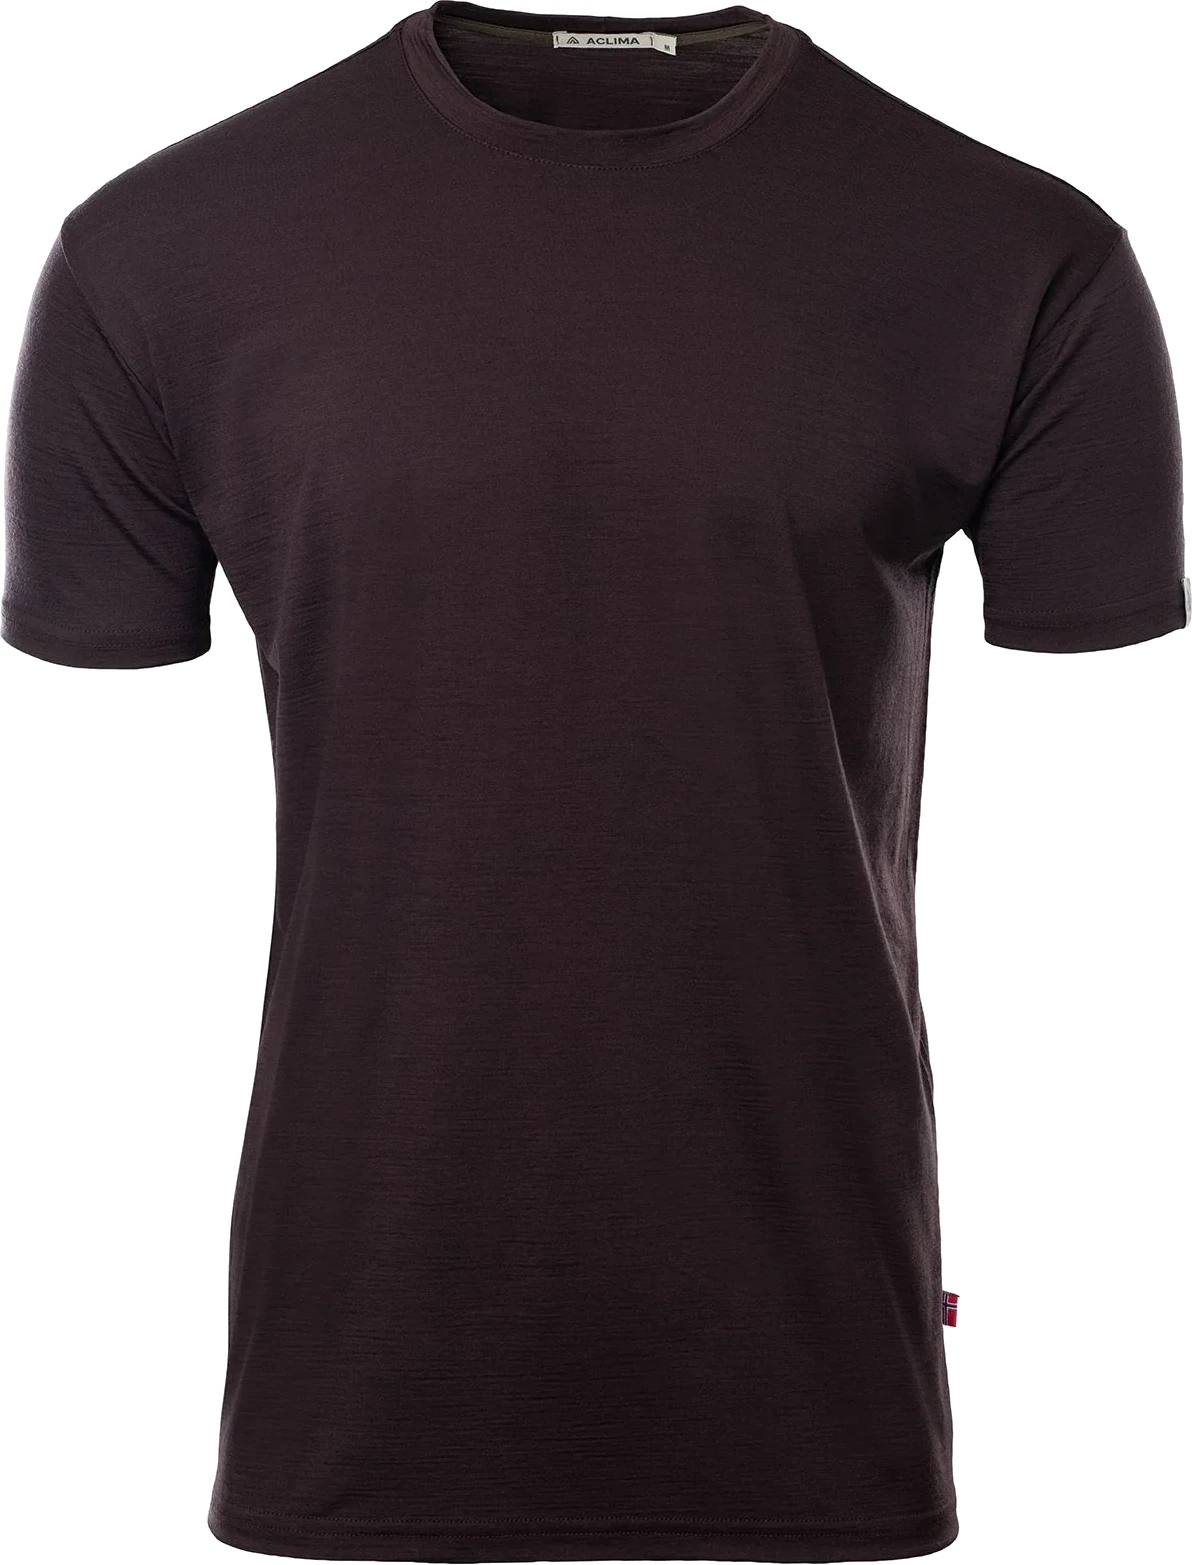 Picture of Aclima Lightwool Classic T-Shirt Men - Chocolate Plum